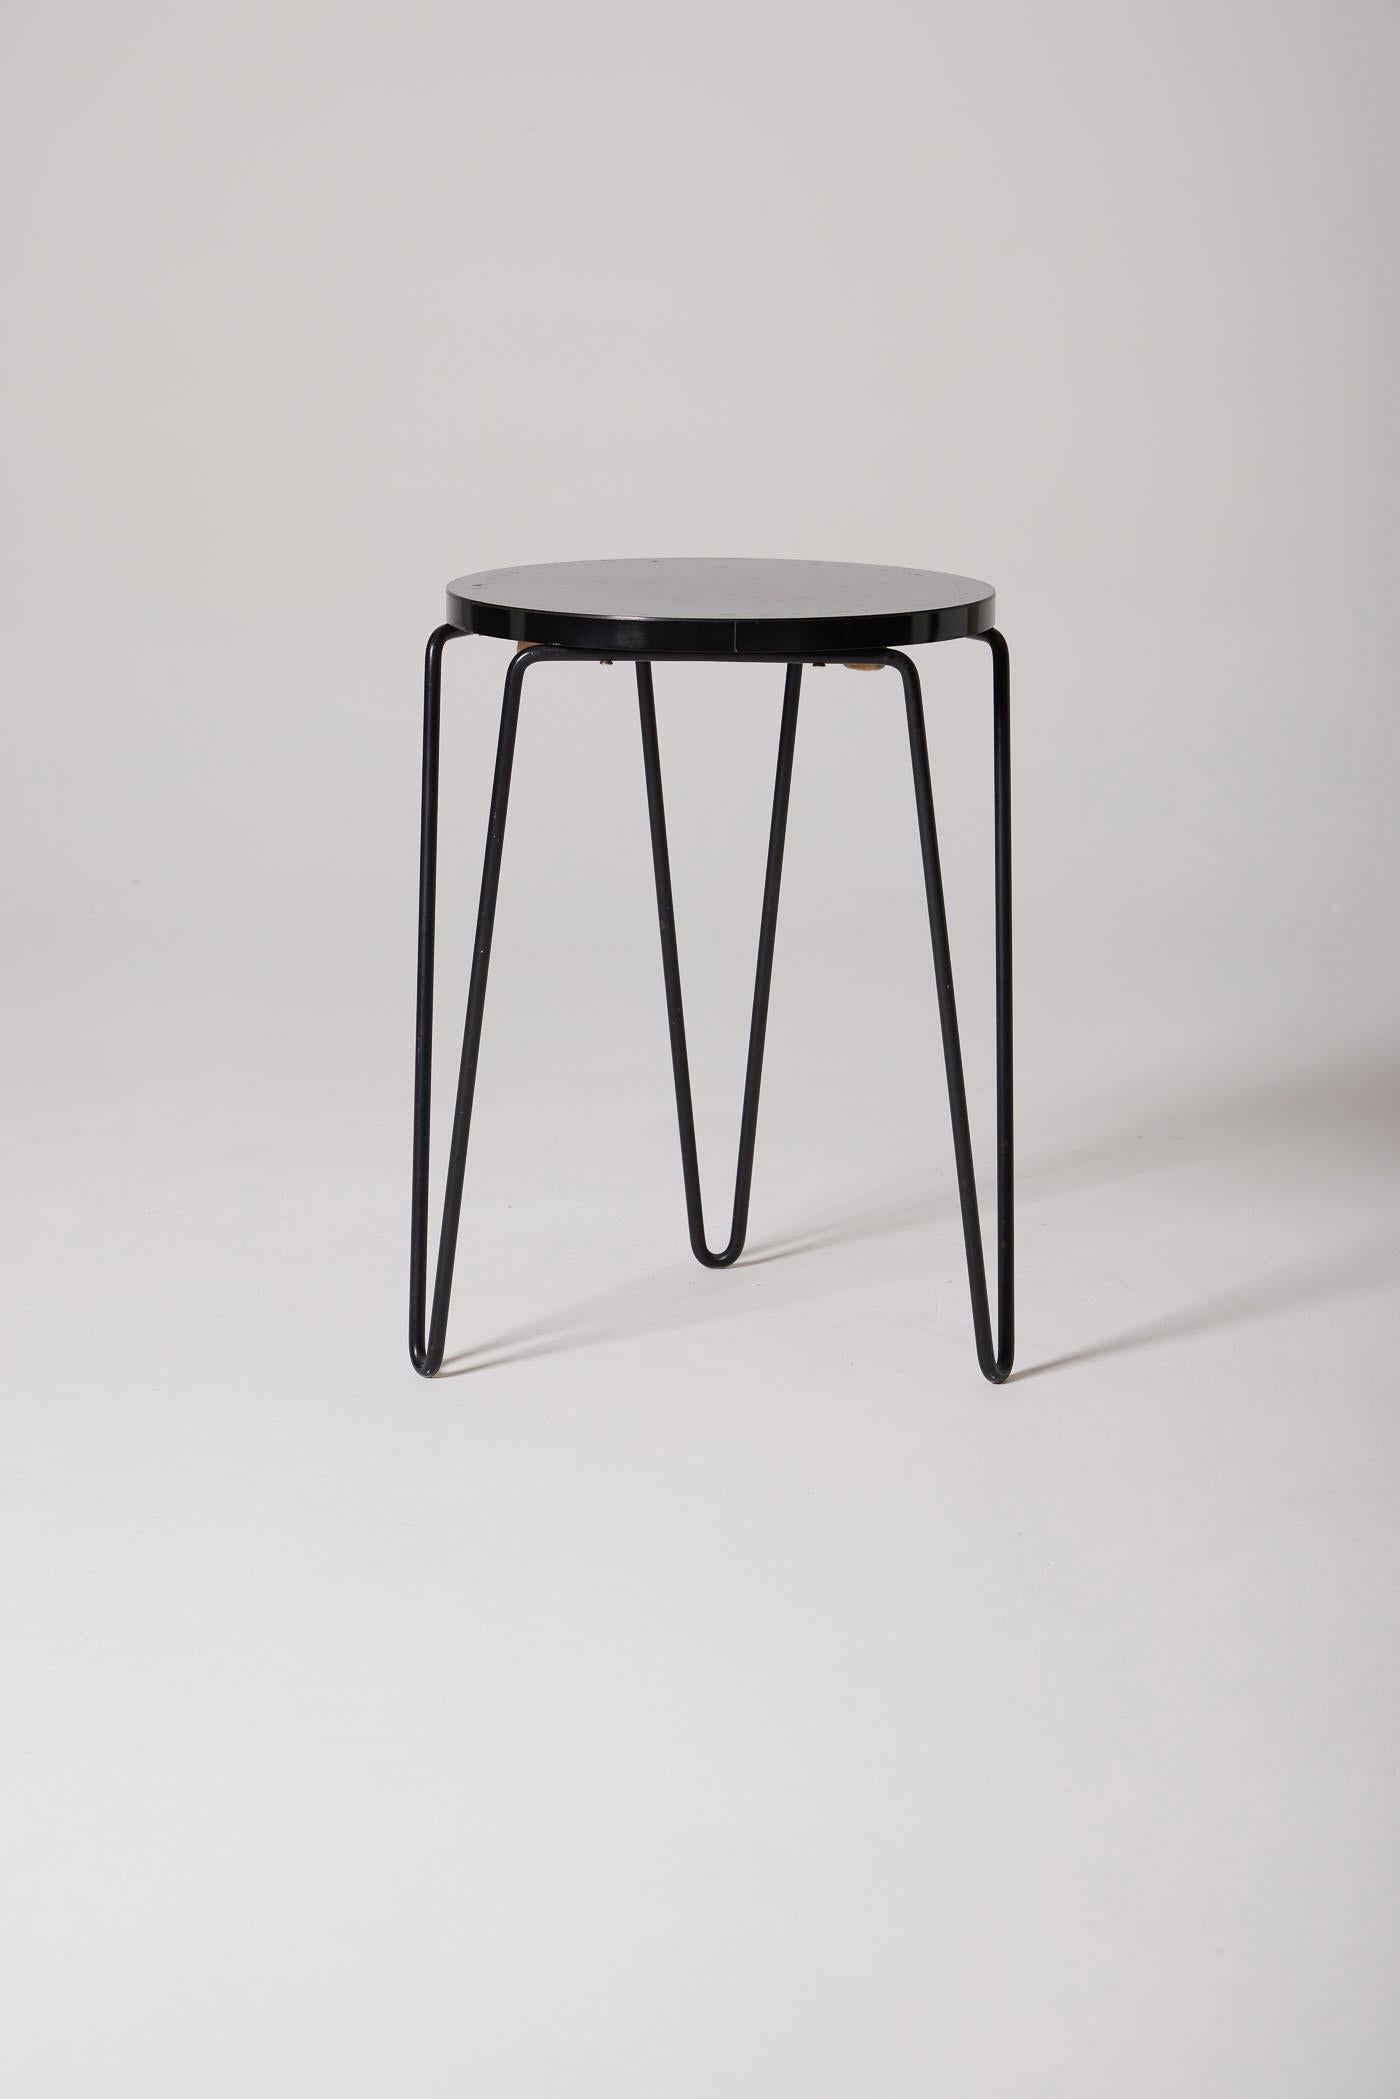 Florence Knoll stool In Good Condition For Sale In PARIS, FR